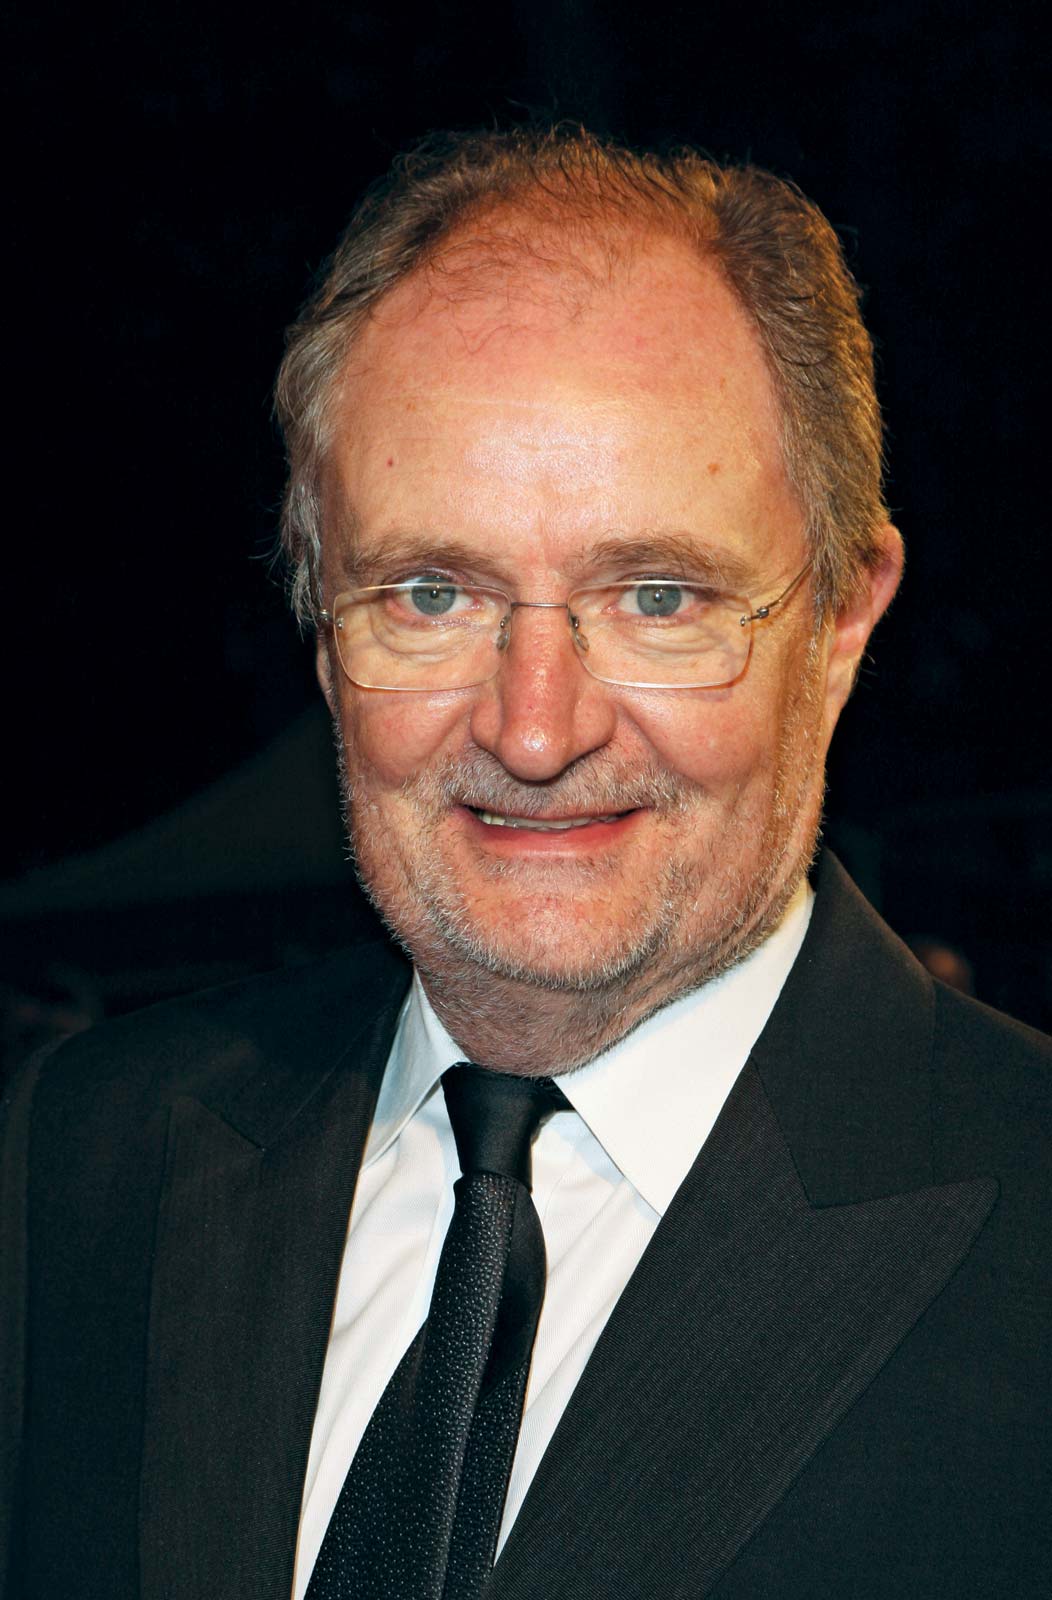 Who portrayed Horace Slughorn in the Harry Potter movies? 2